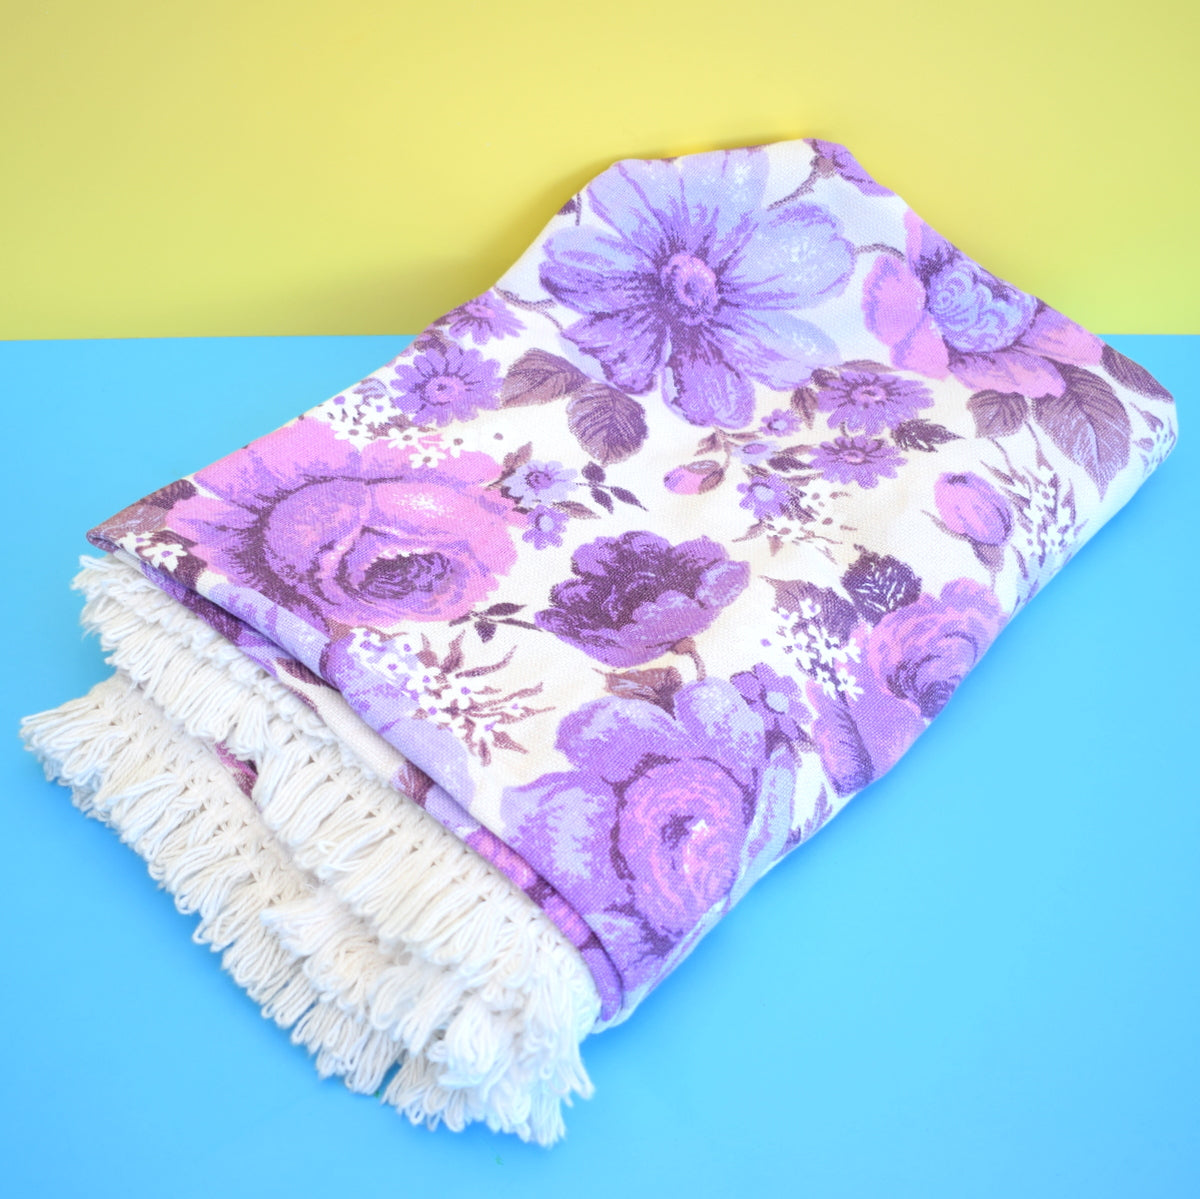 Vintage 1960s Single Bed Cover - Textured Weave With Fringe - Flower Power - Purple